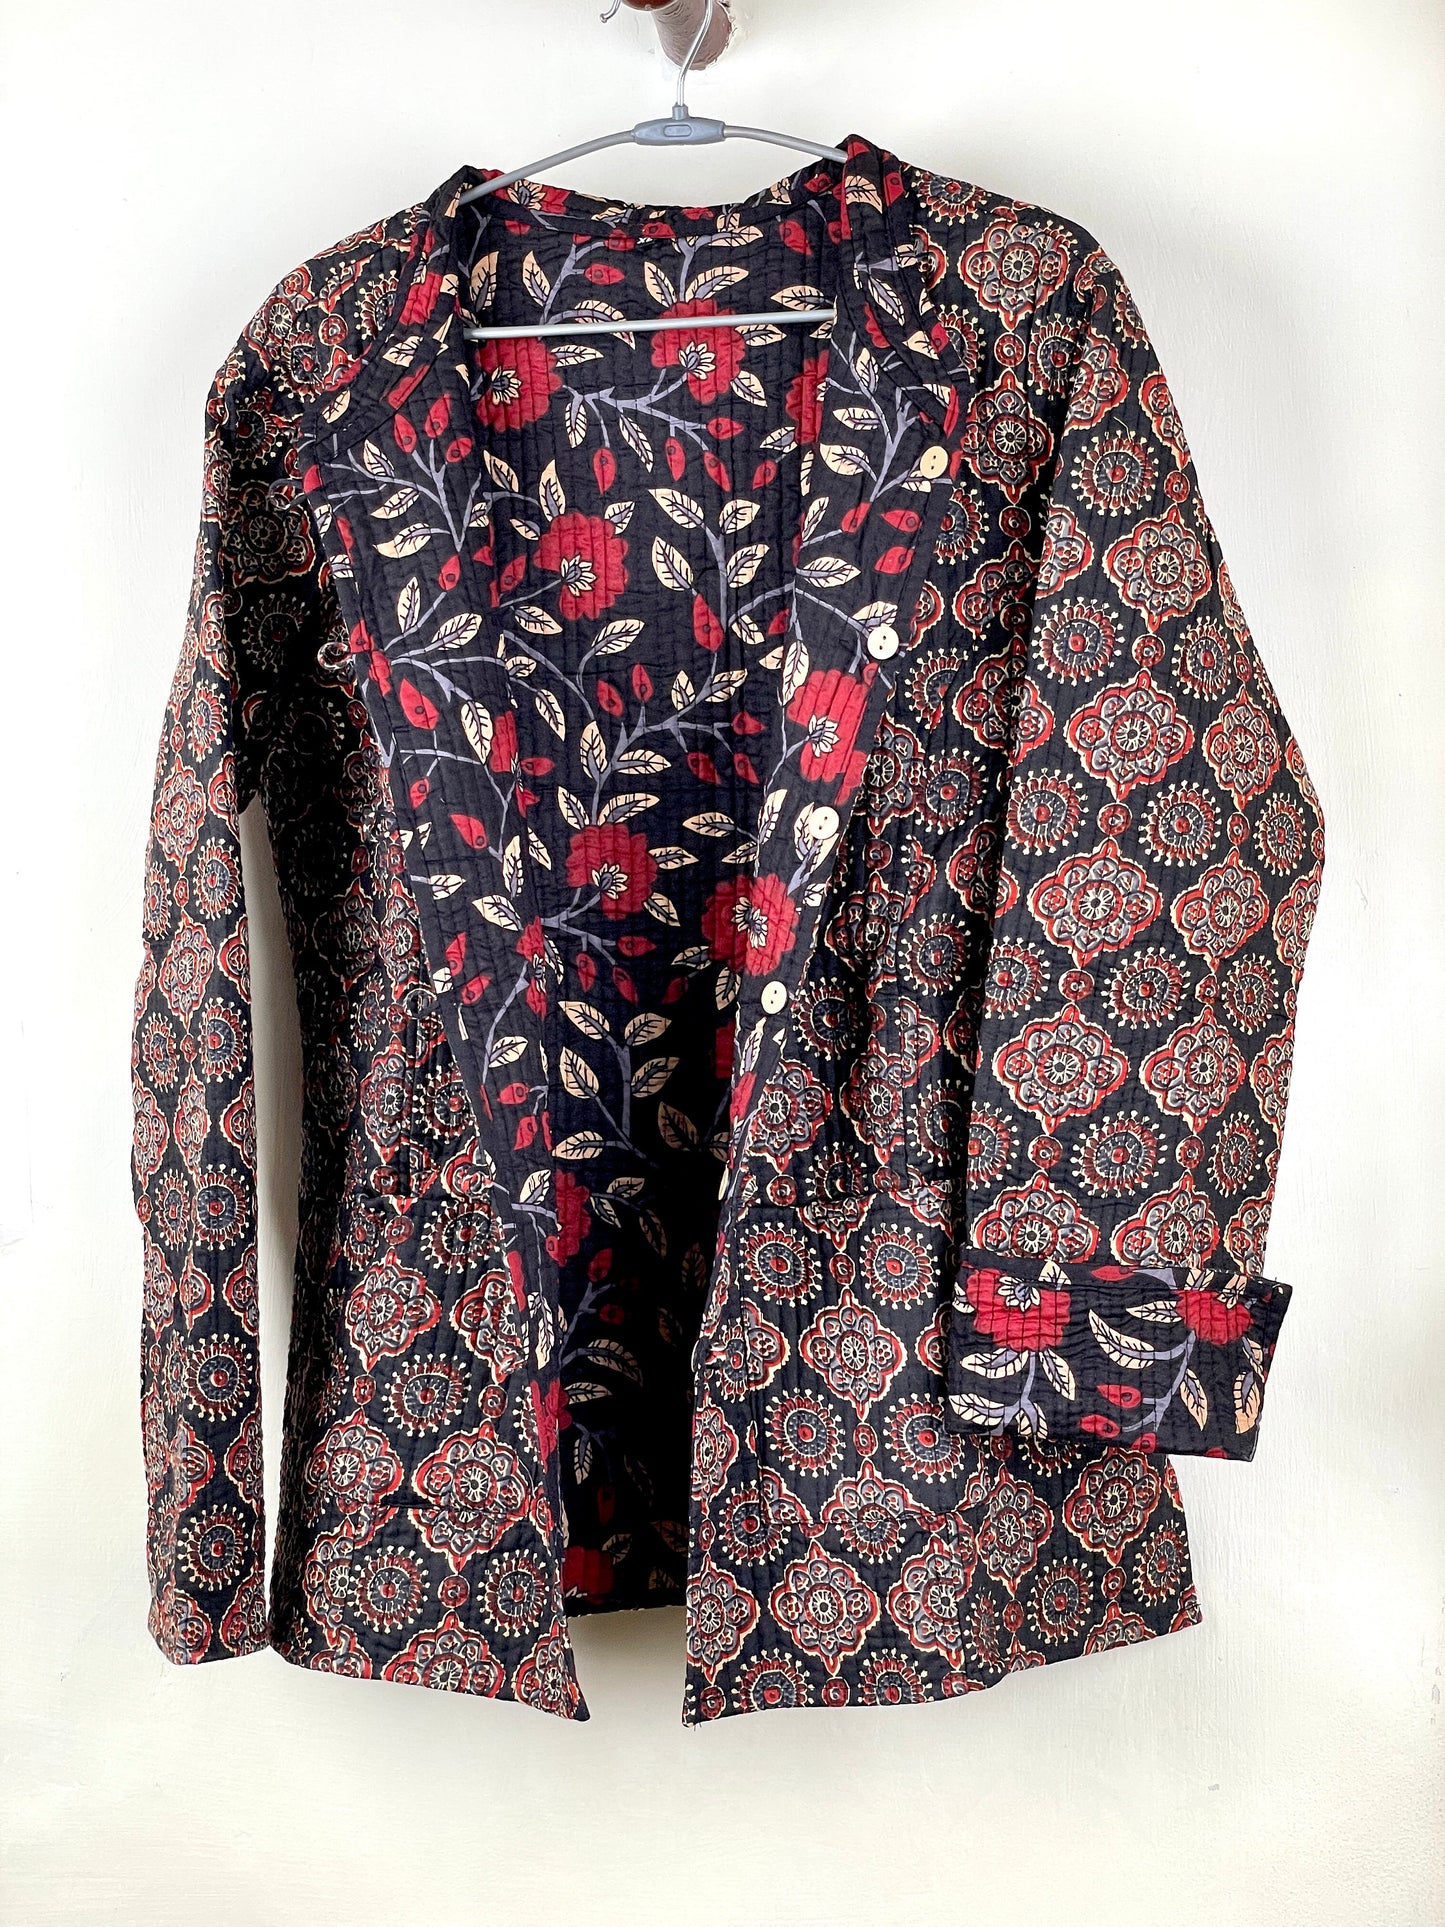 Indian Handmade Quilted Fabric Jacket Stylish Black & Red Floral Women's Coat, Reversible Jacket for Her